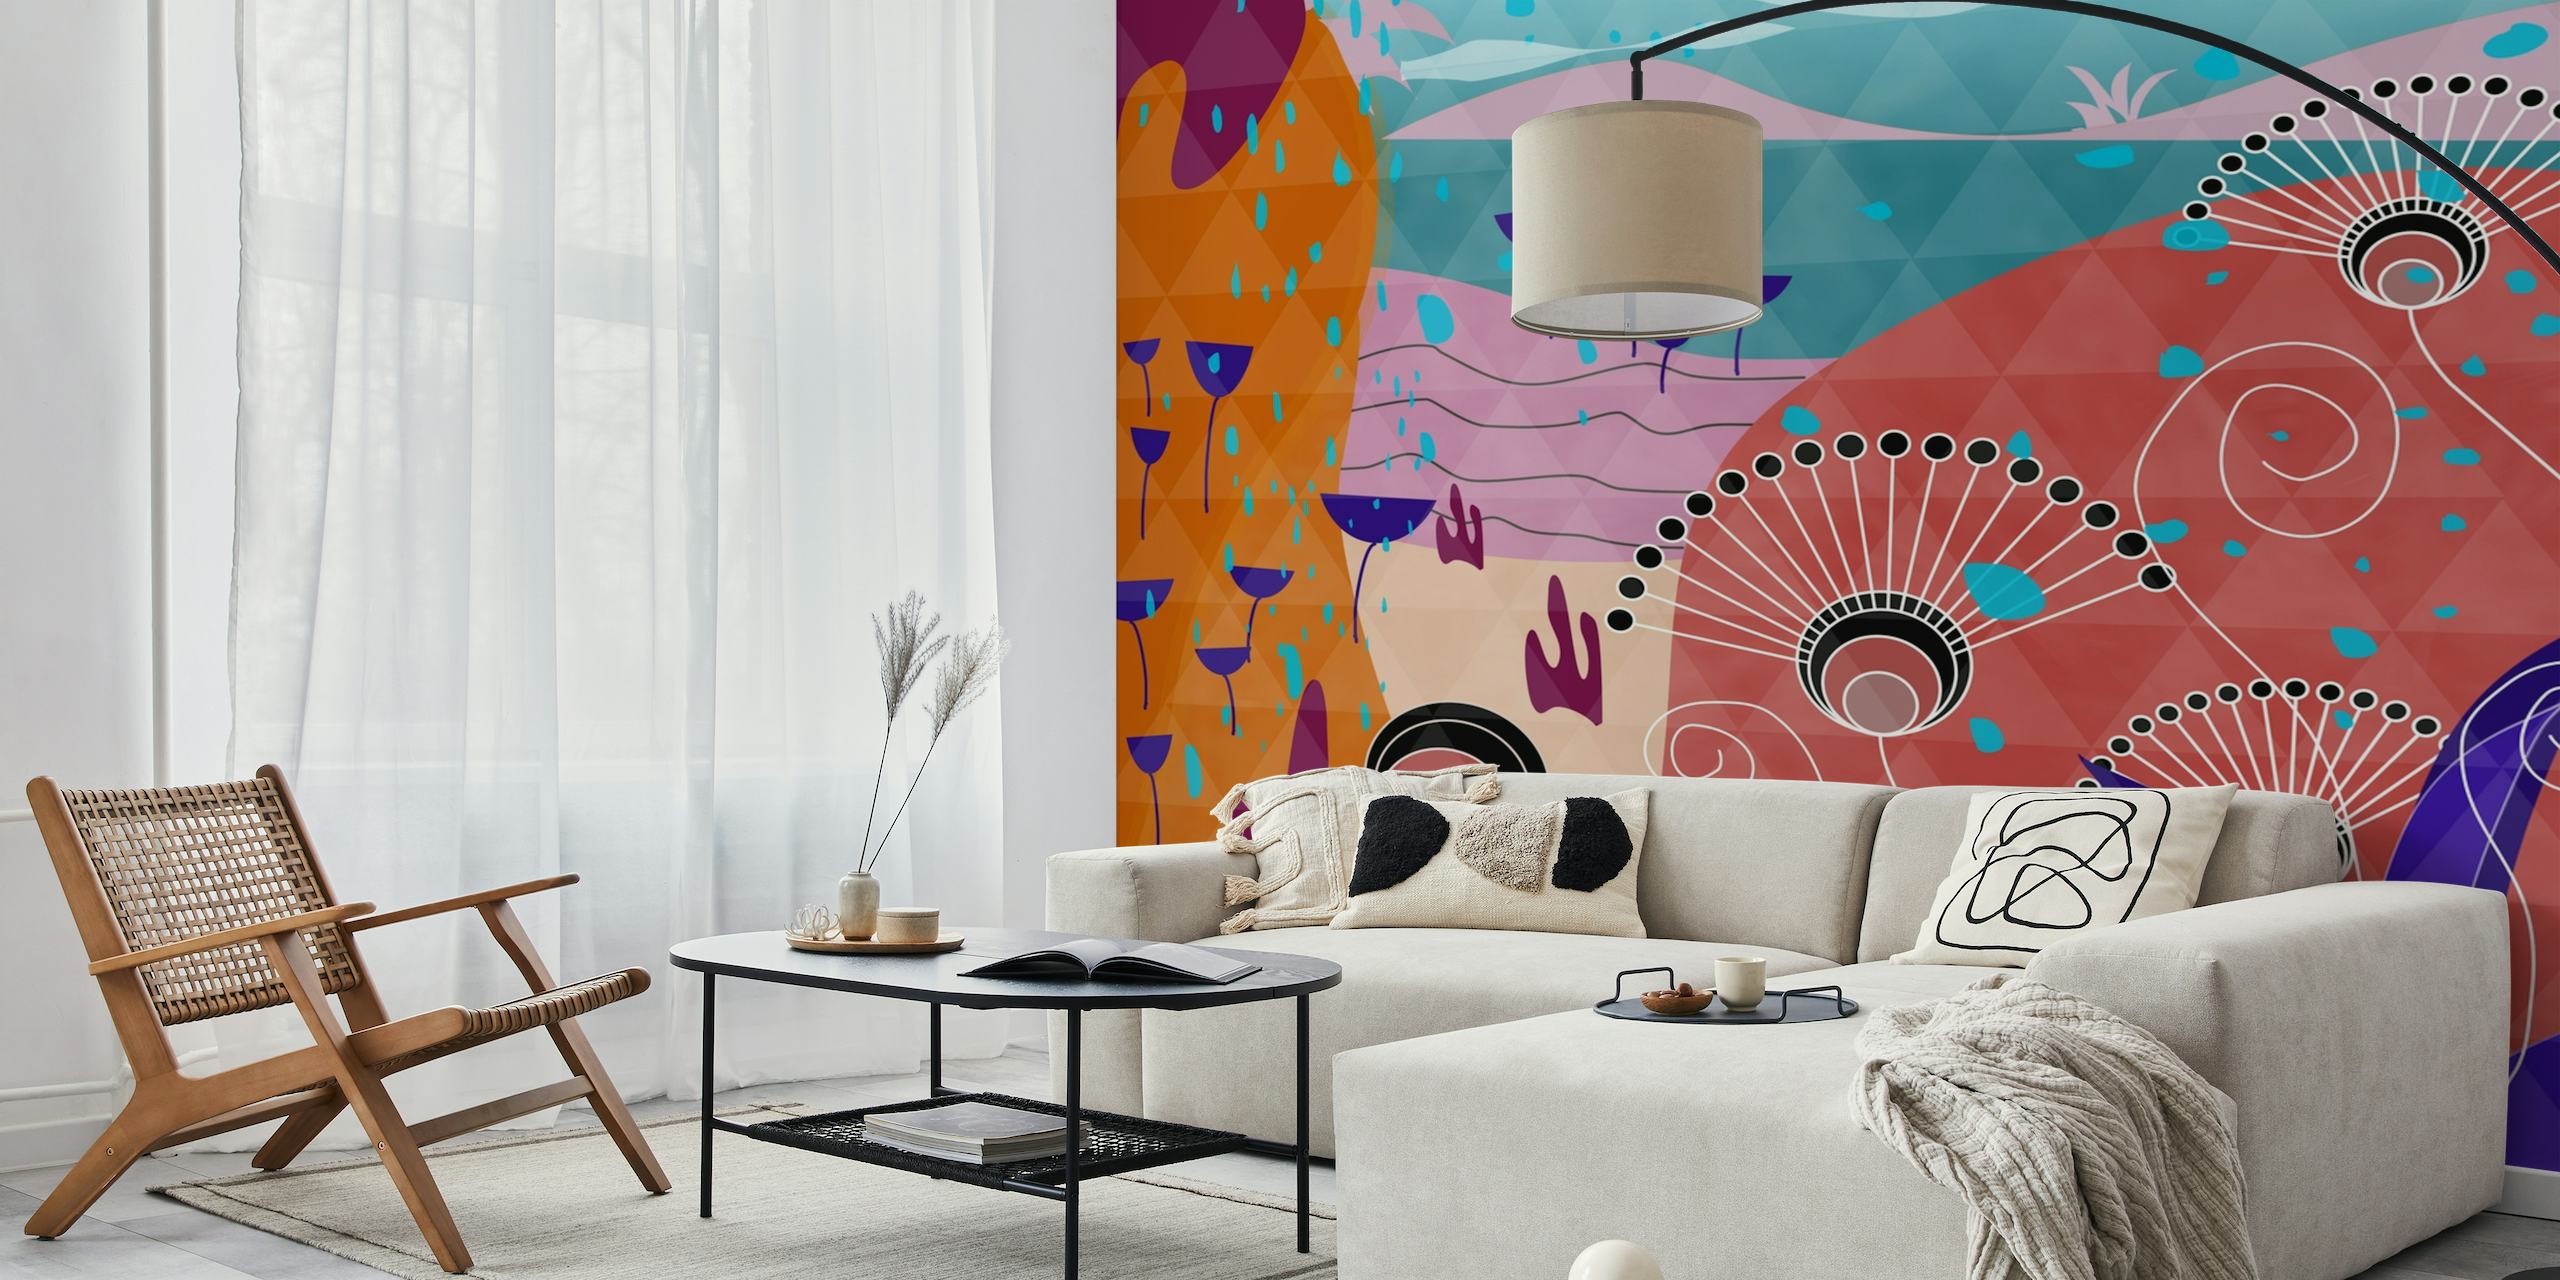 Stylized exotic landscape wall mural with abstract nature motifs in vibrant colors